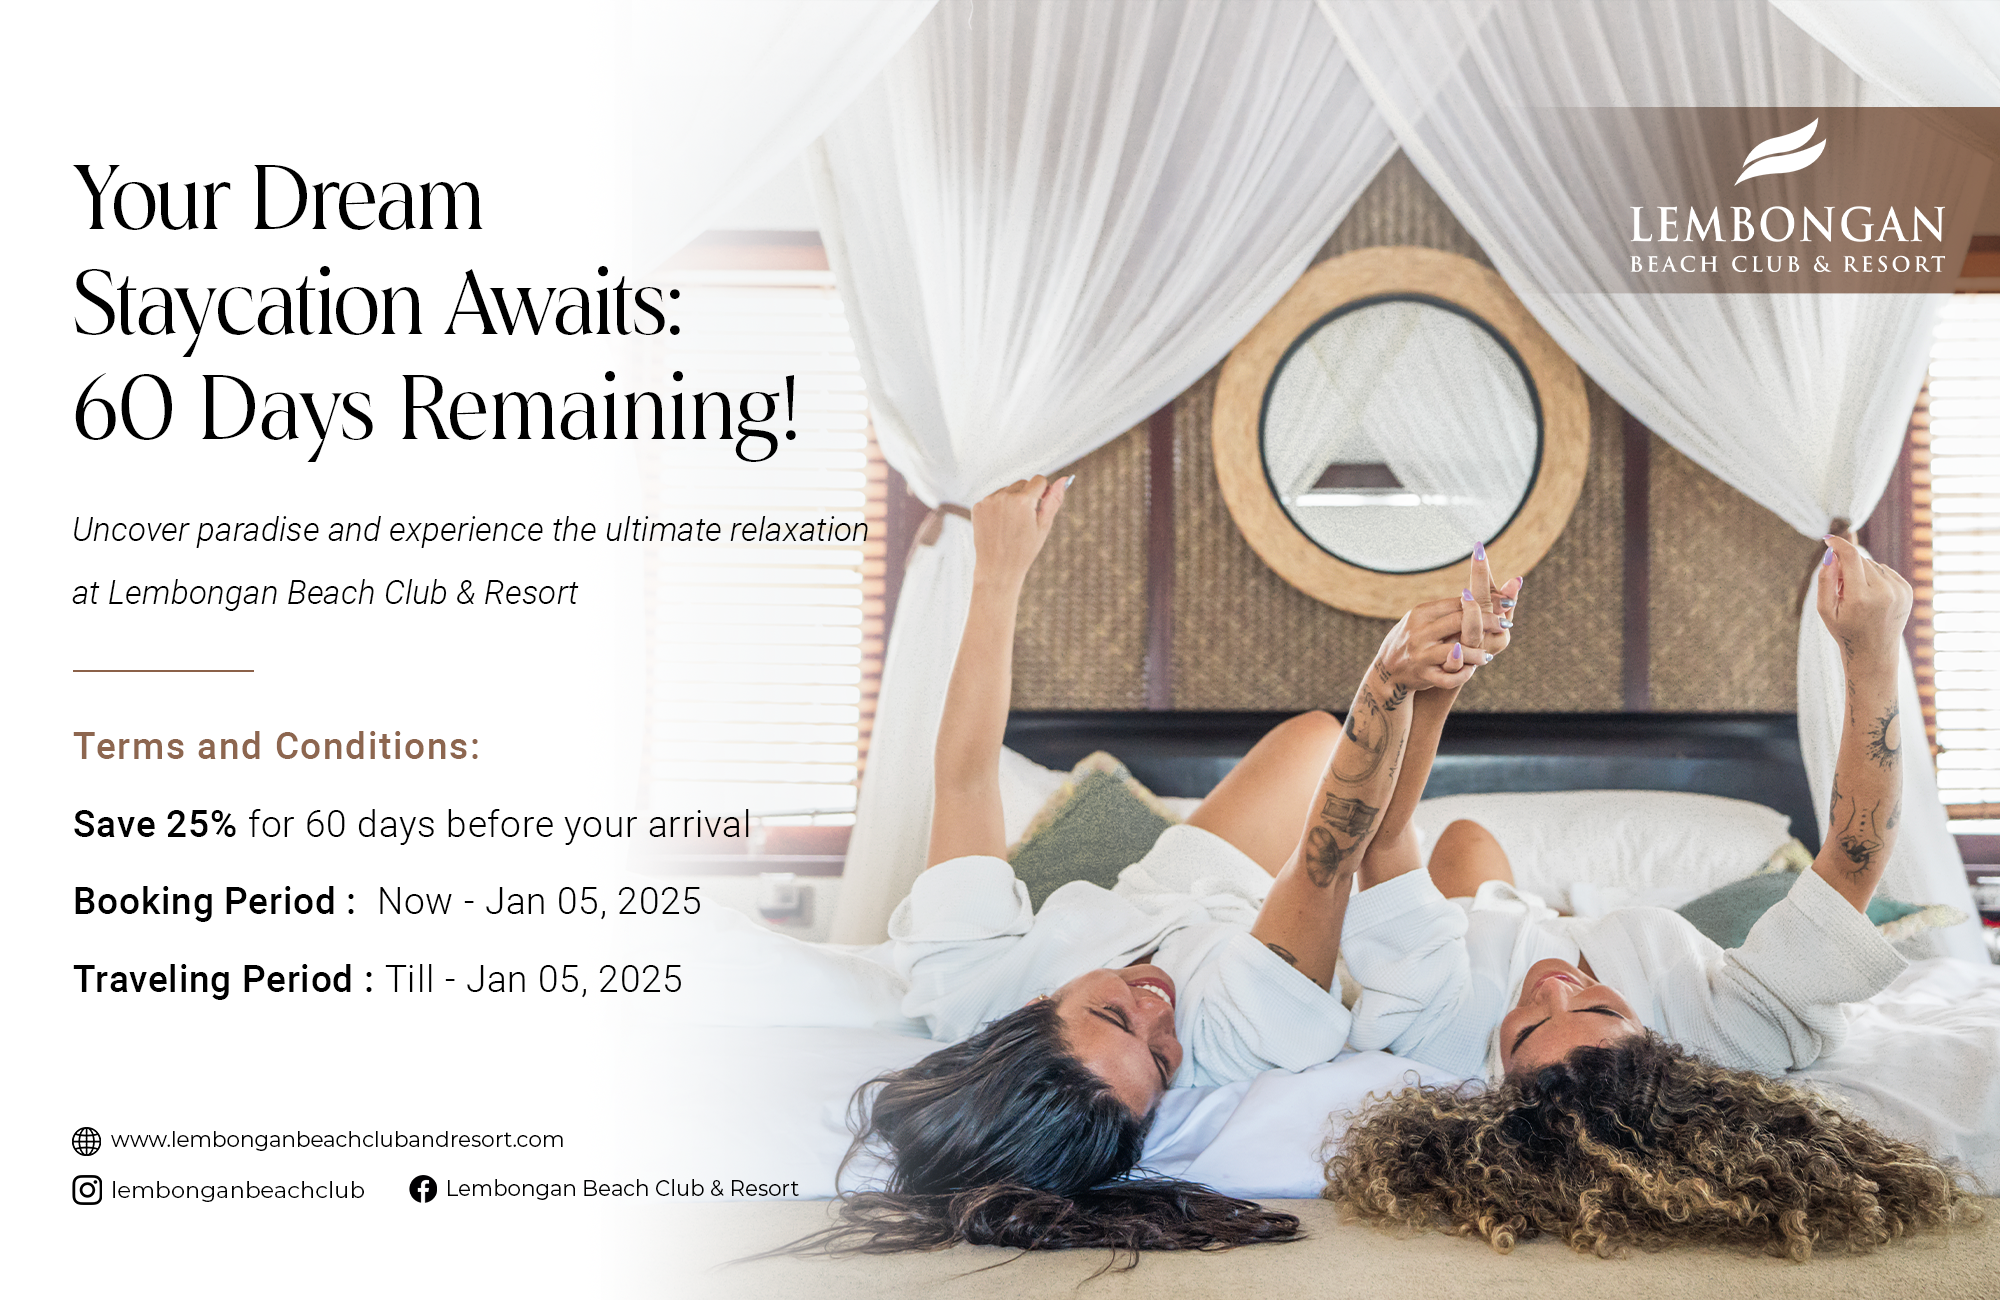 Your Dream Staycation Awaits: 60 Days Remaining!